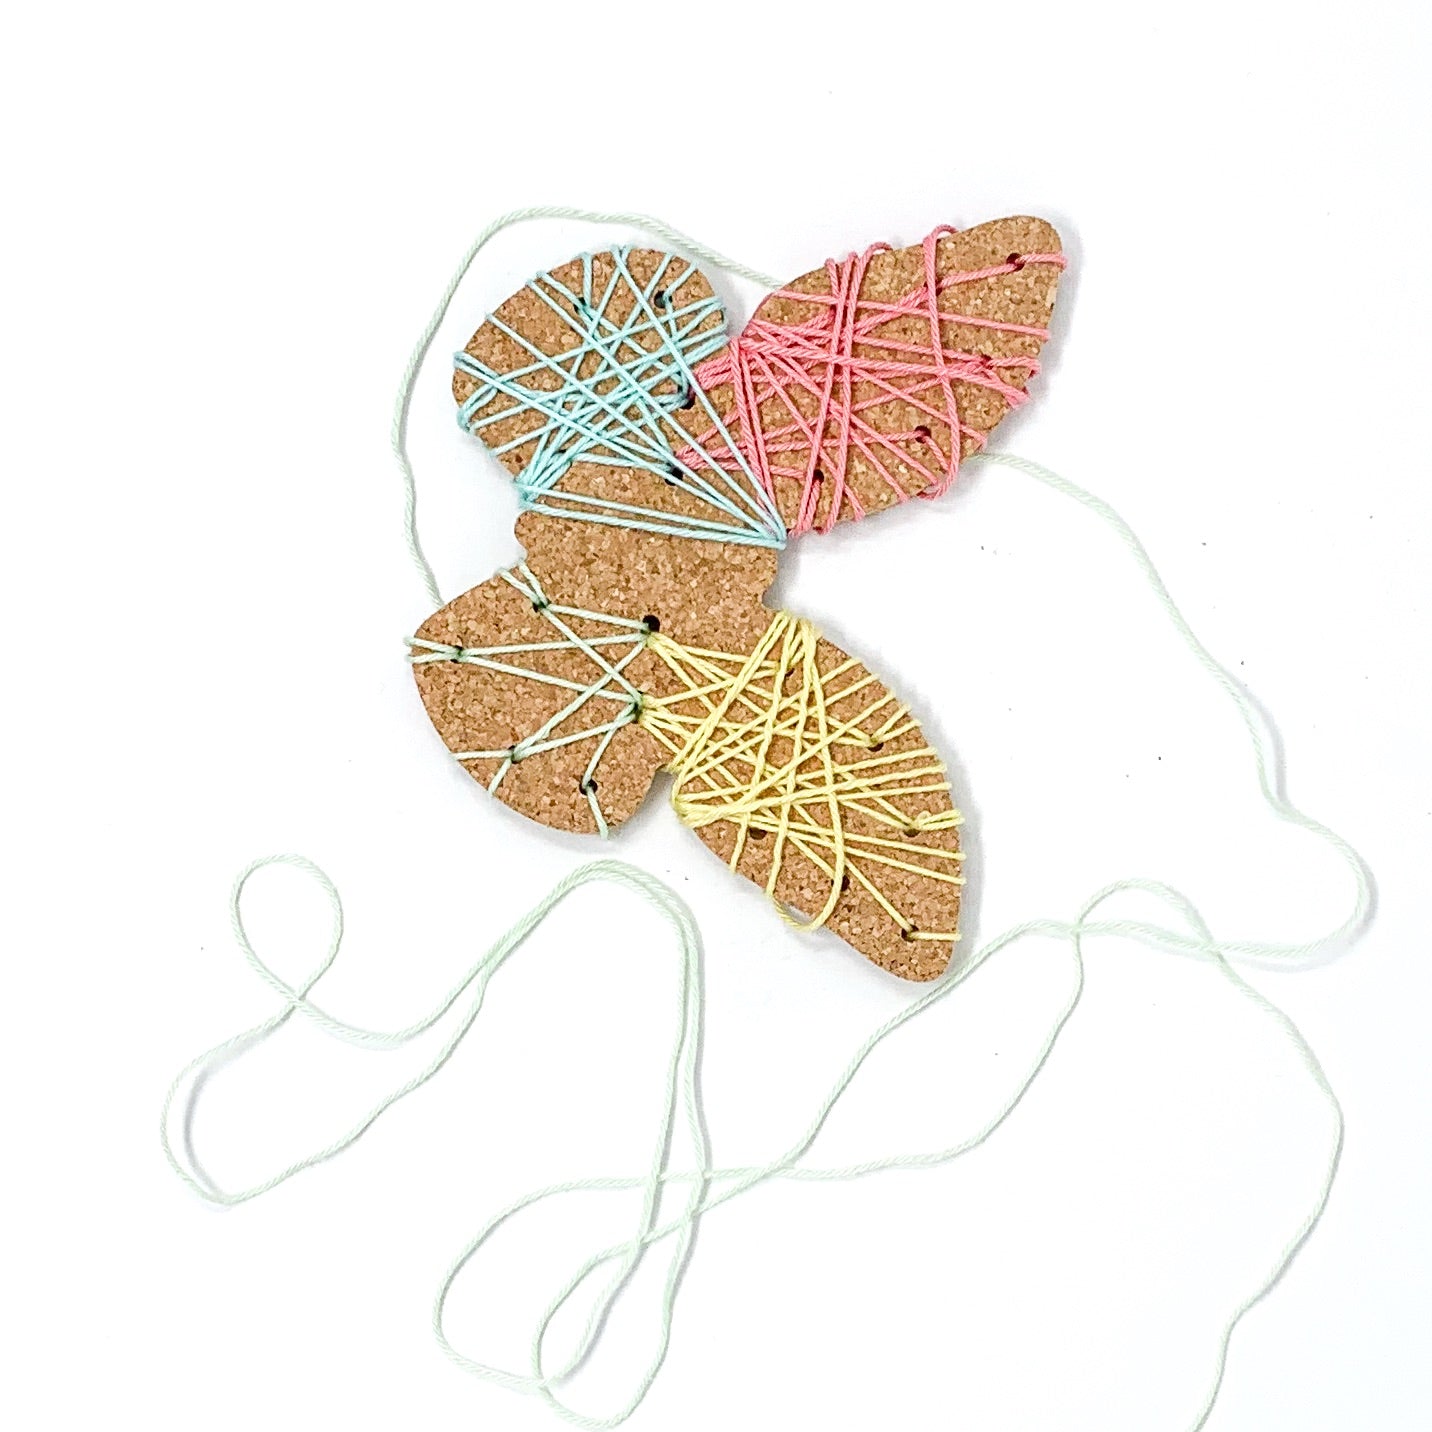 Craft kit - Butterfly, Sheep - Craft kit for children weaving, drawing, cutting 6-8 years old.